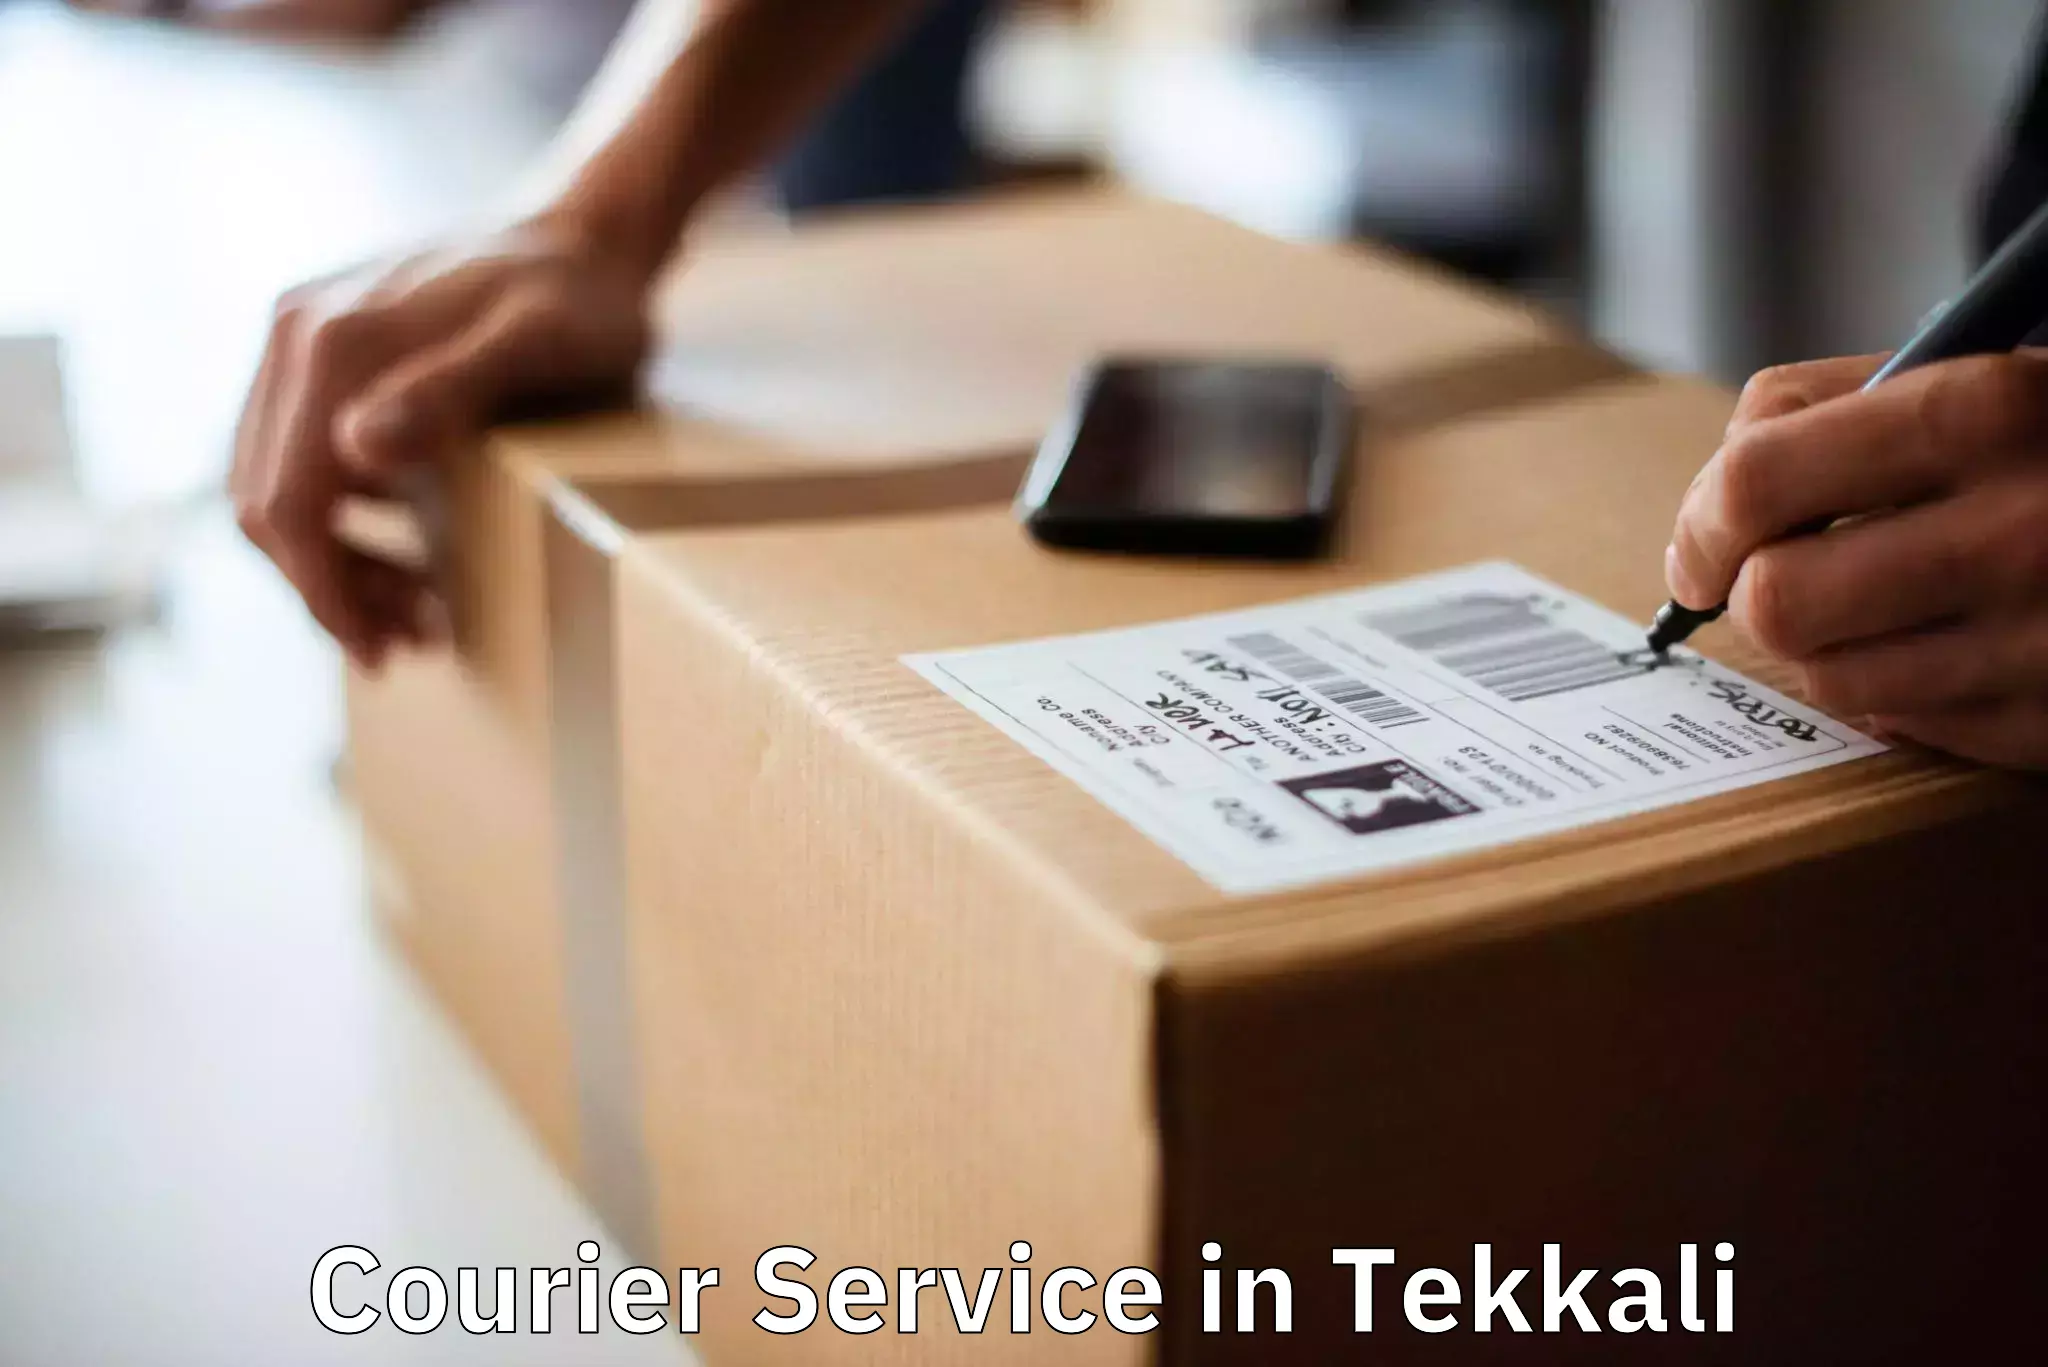 Comprehensive freight services in Tekkali